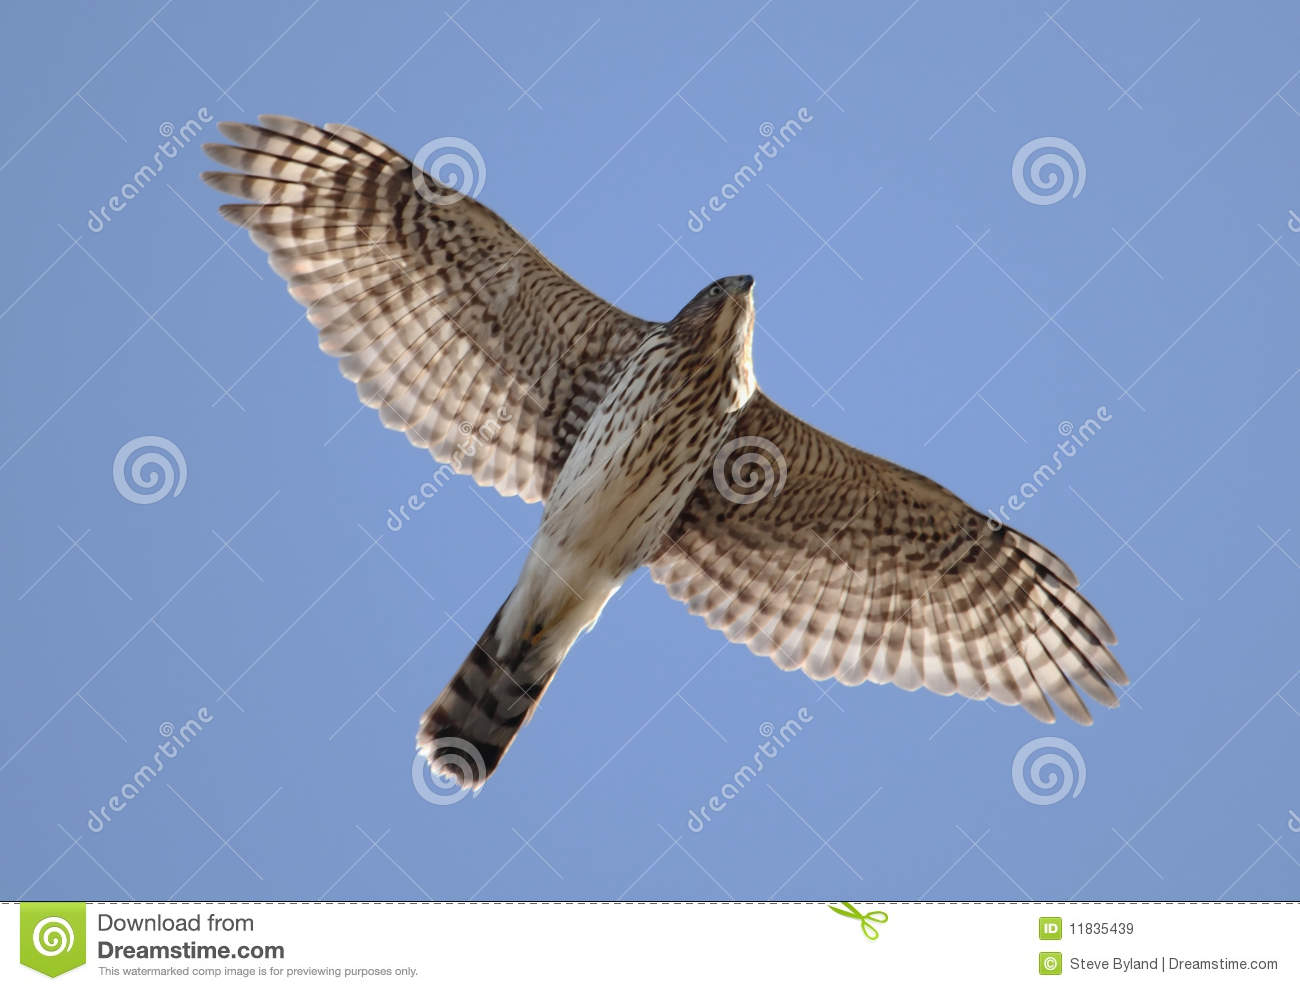 Juvenile Female Coopers Hawk  Accipiter Cooperii  Flying Against A